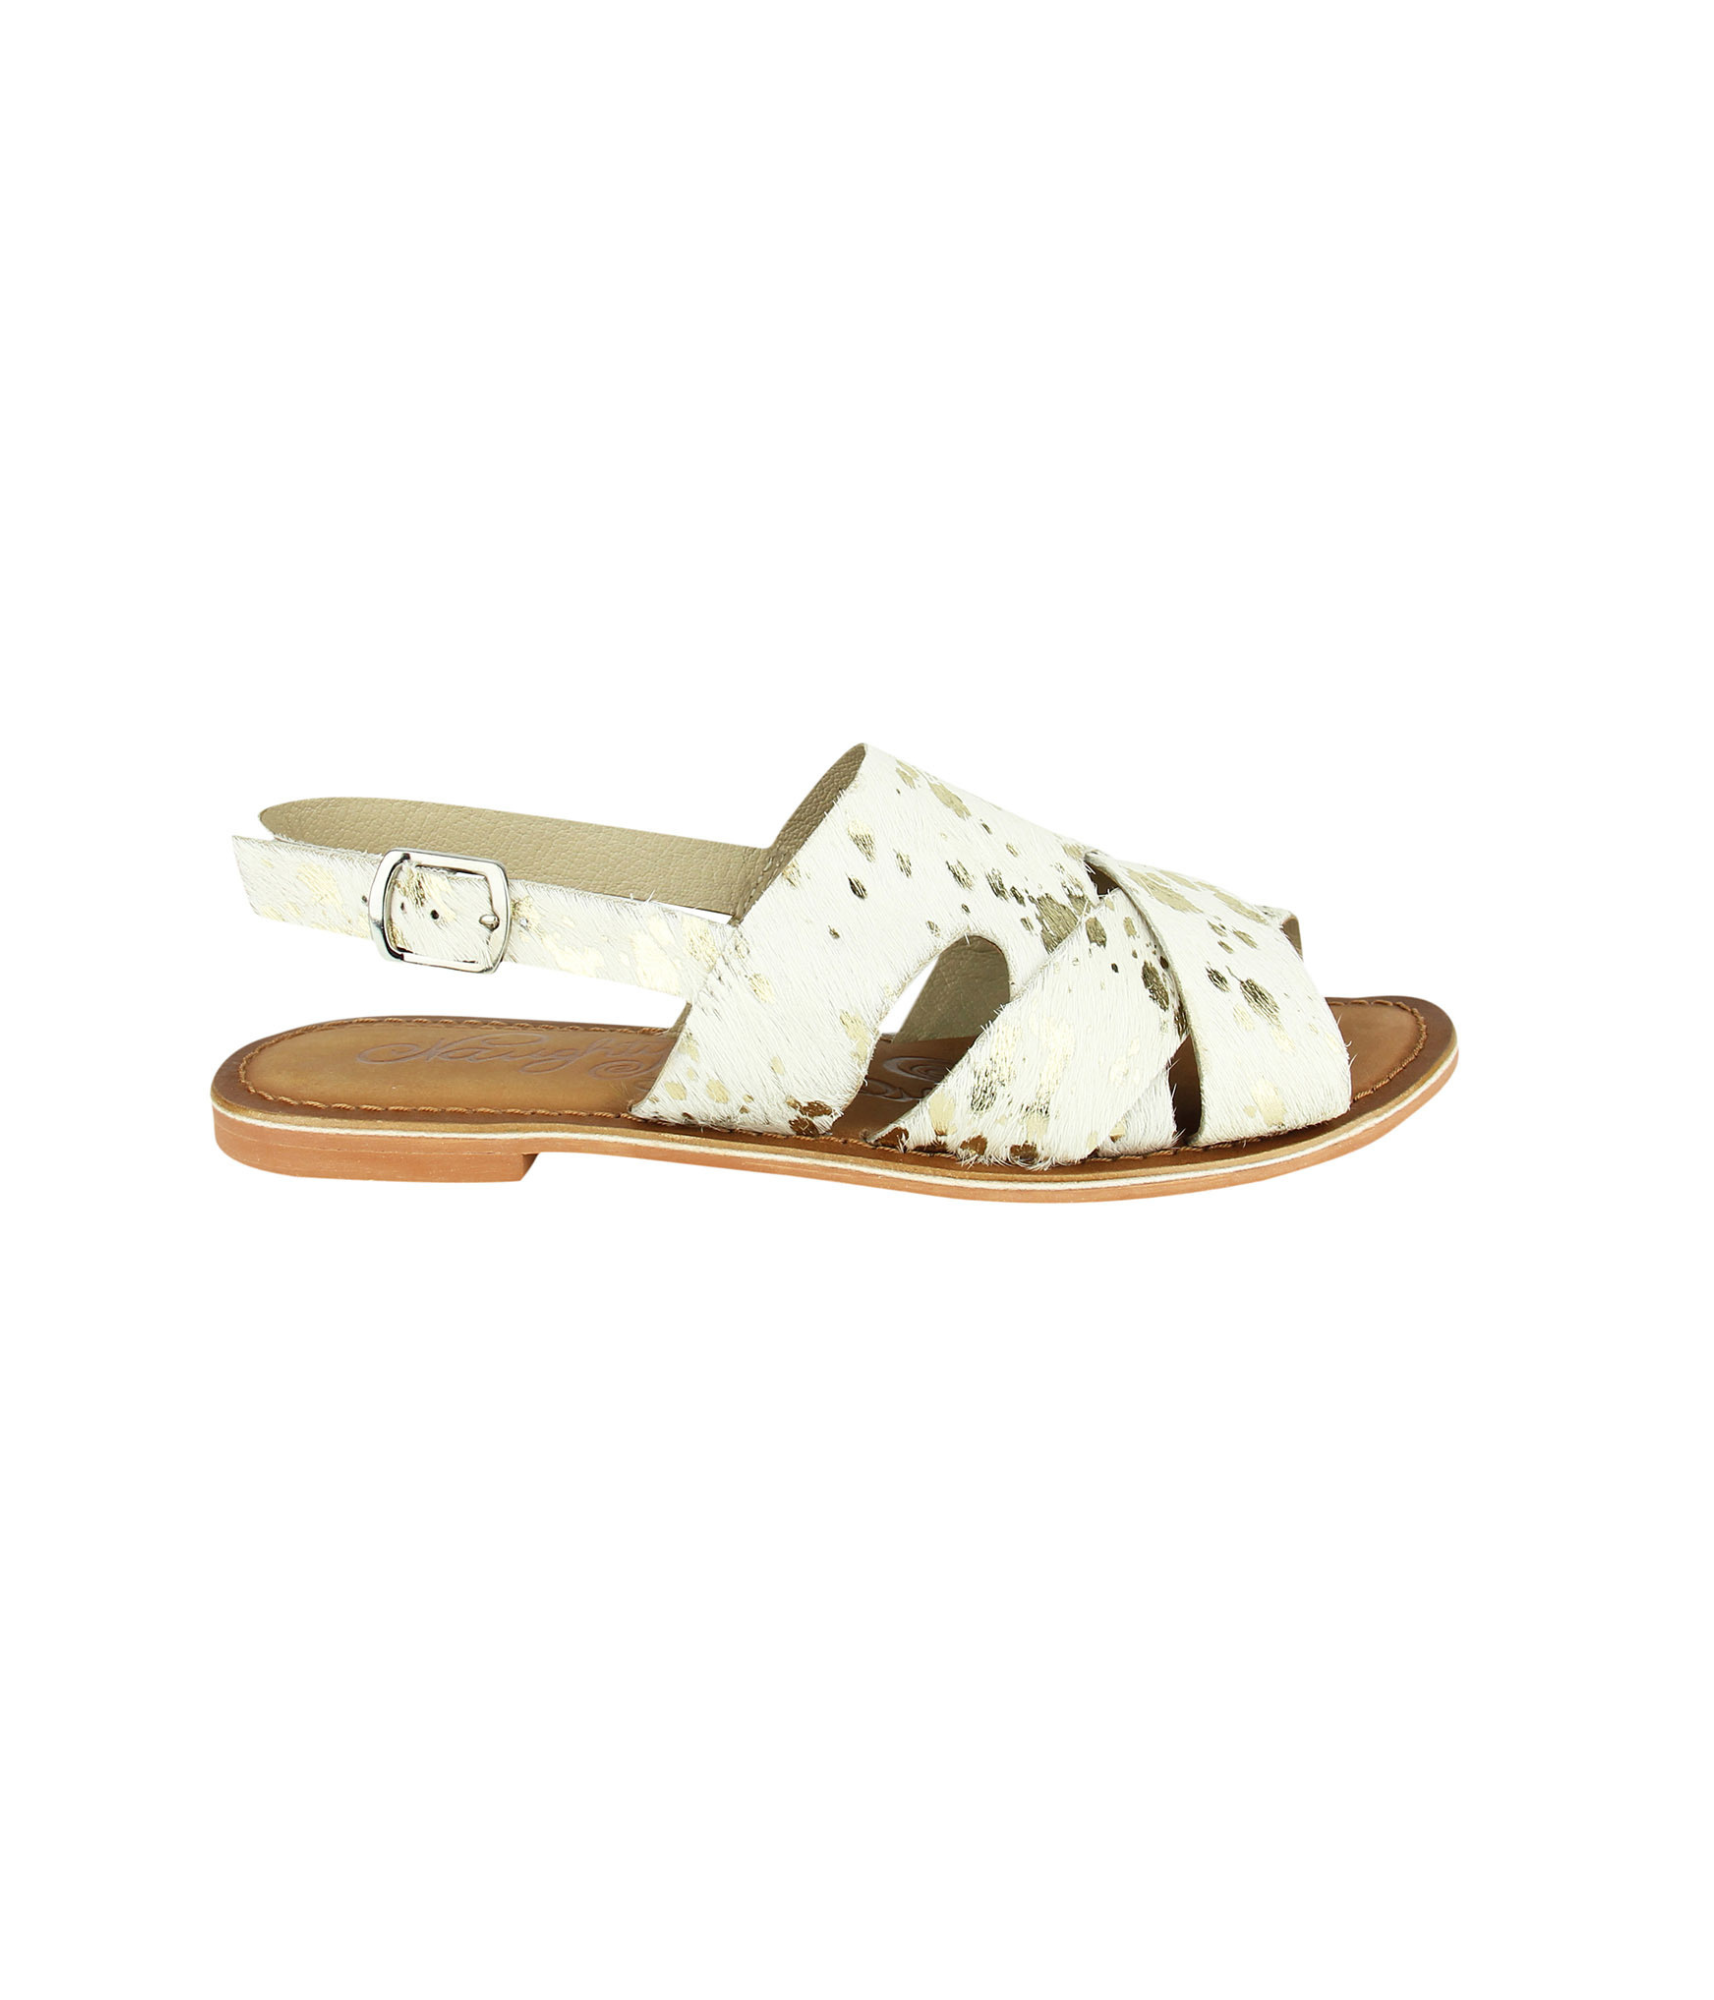 Cup of Tea Sandals in White